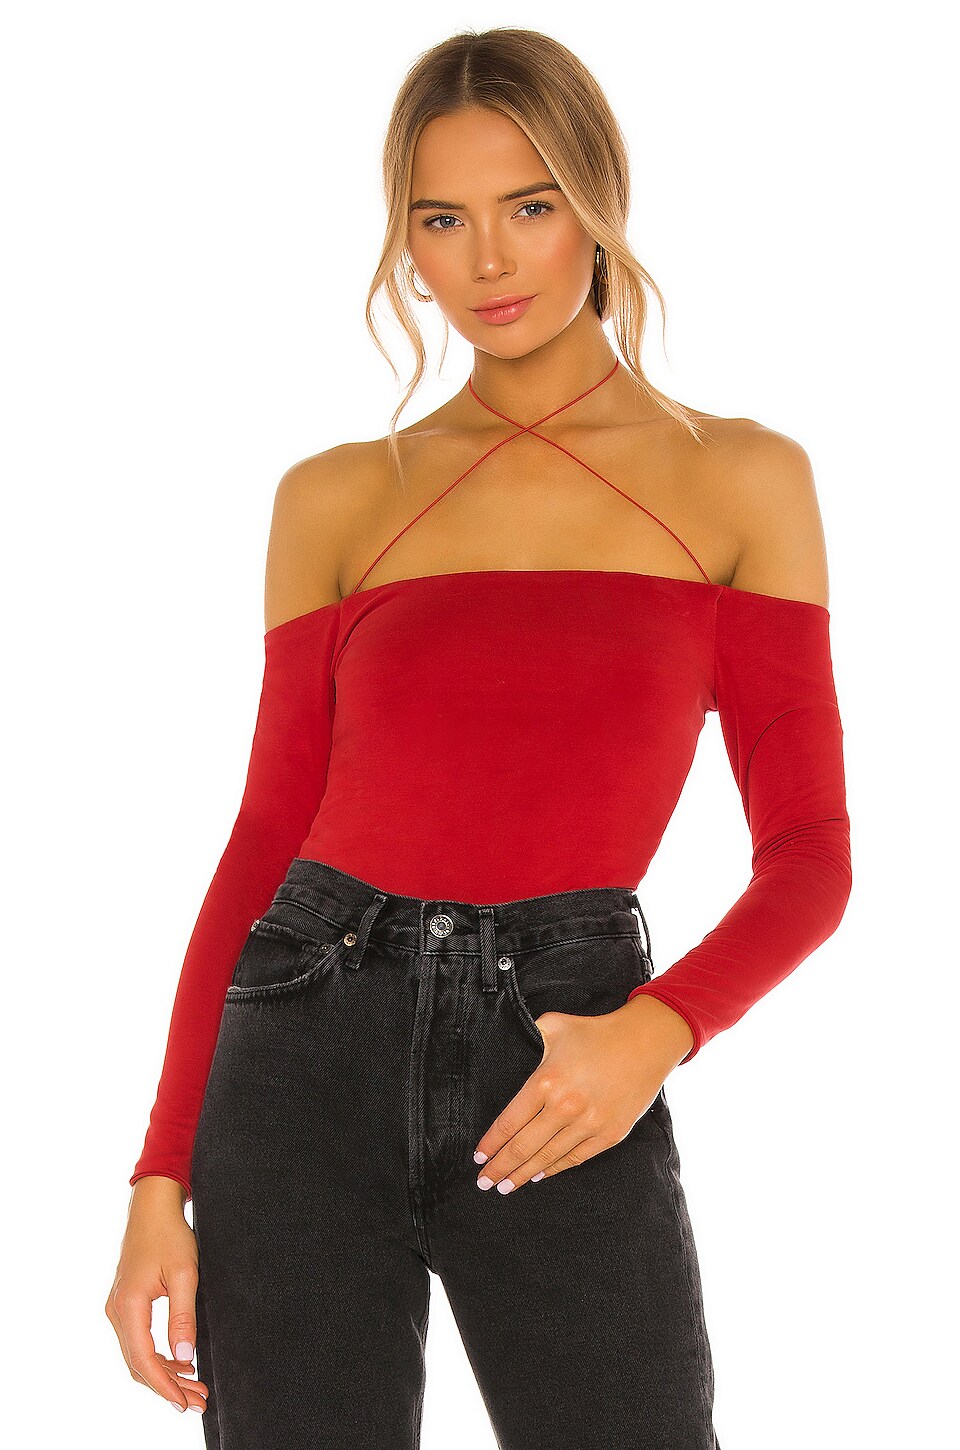 h:ours Real Love Bodysuit in Ruby | REVOLVE